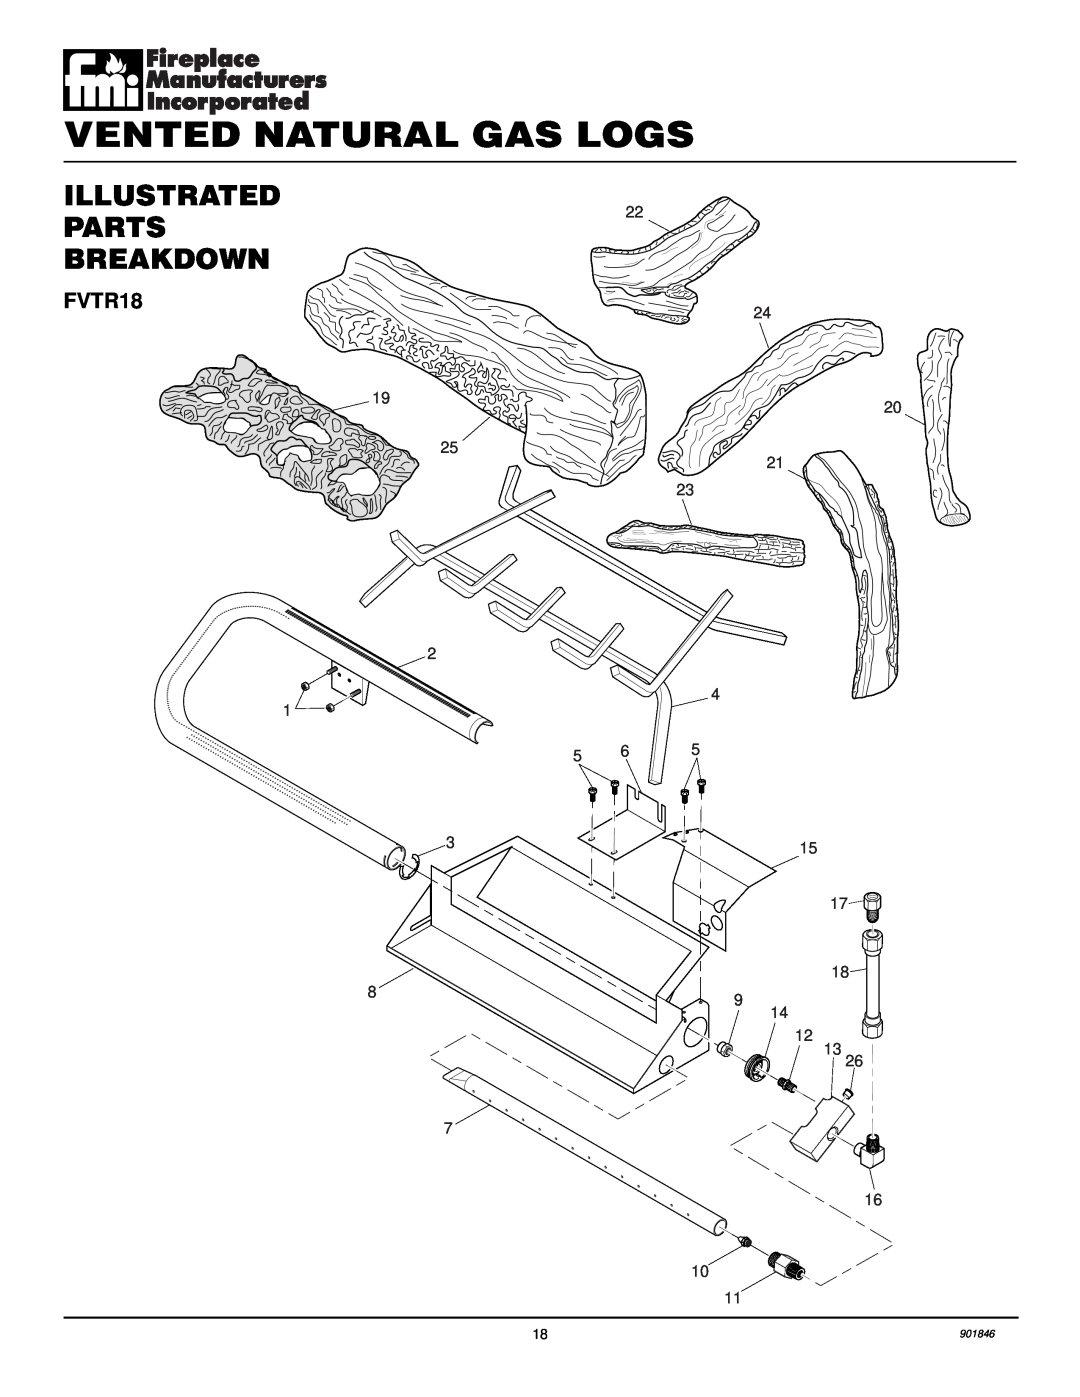 FMI FVTR18, FVTR24 installation manual Illustrated Parts Breakdown, Vented Natural Gas Logs, 901846 